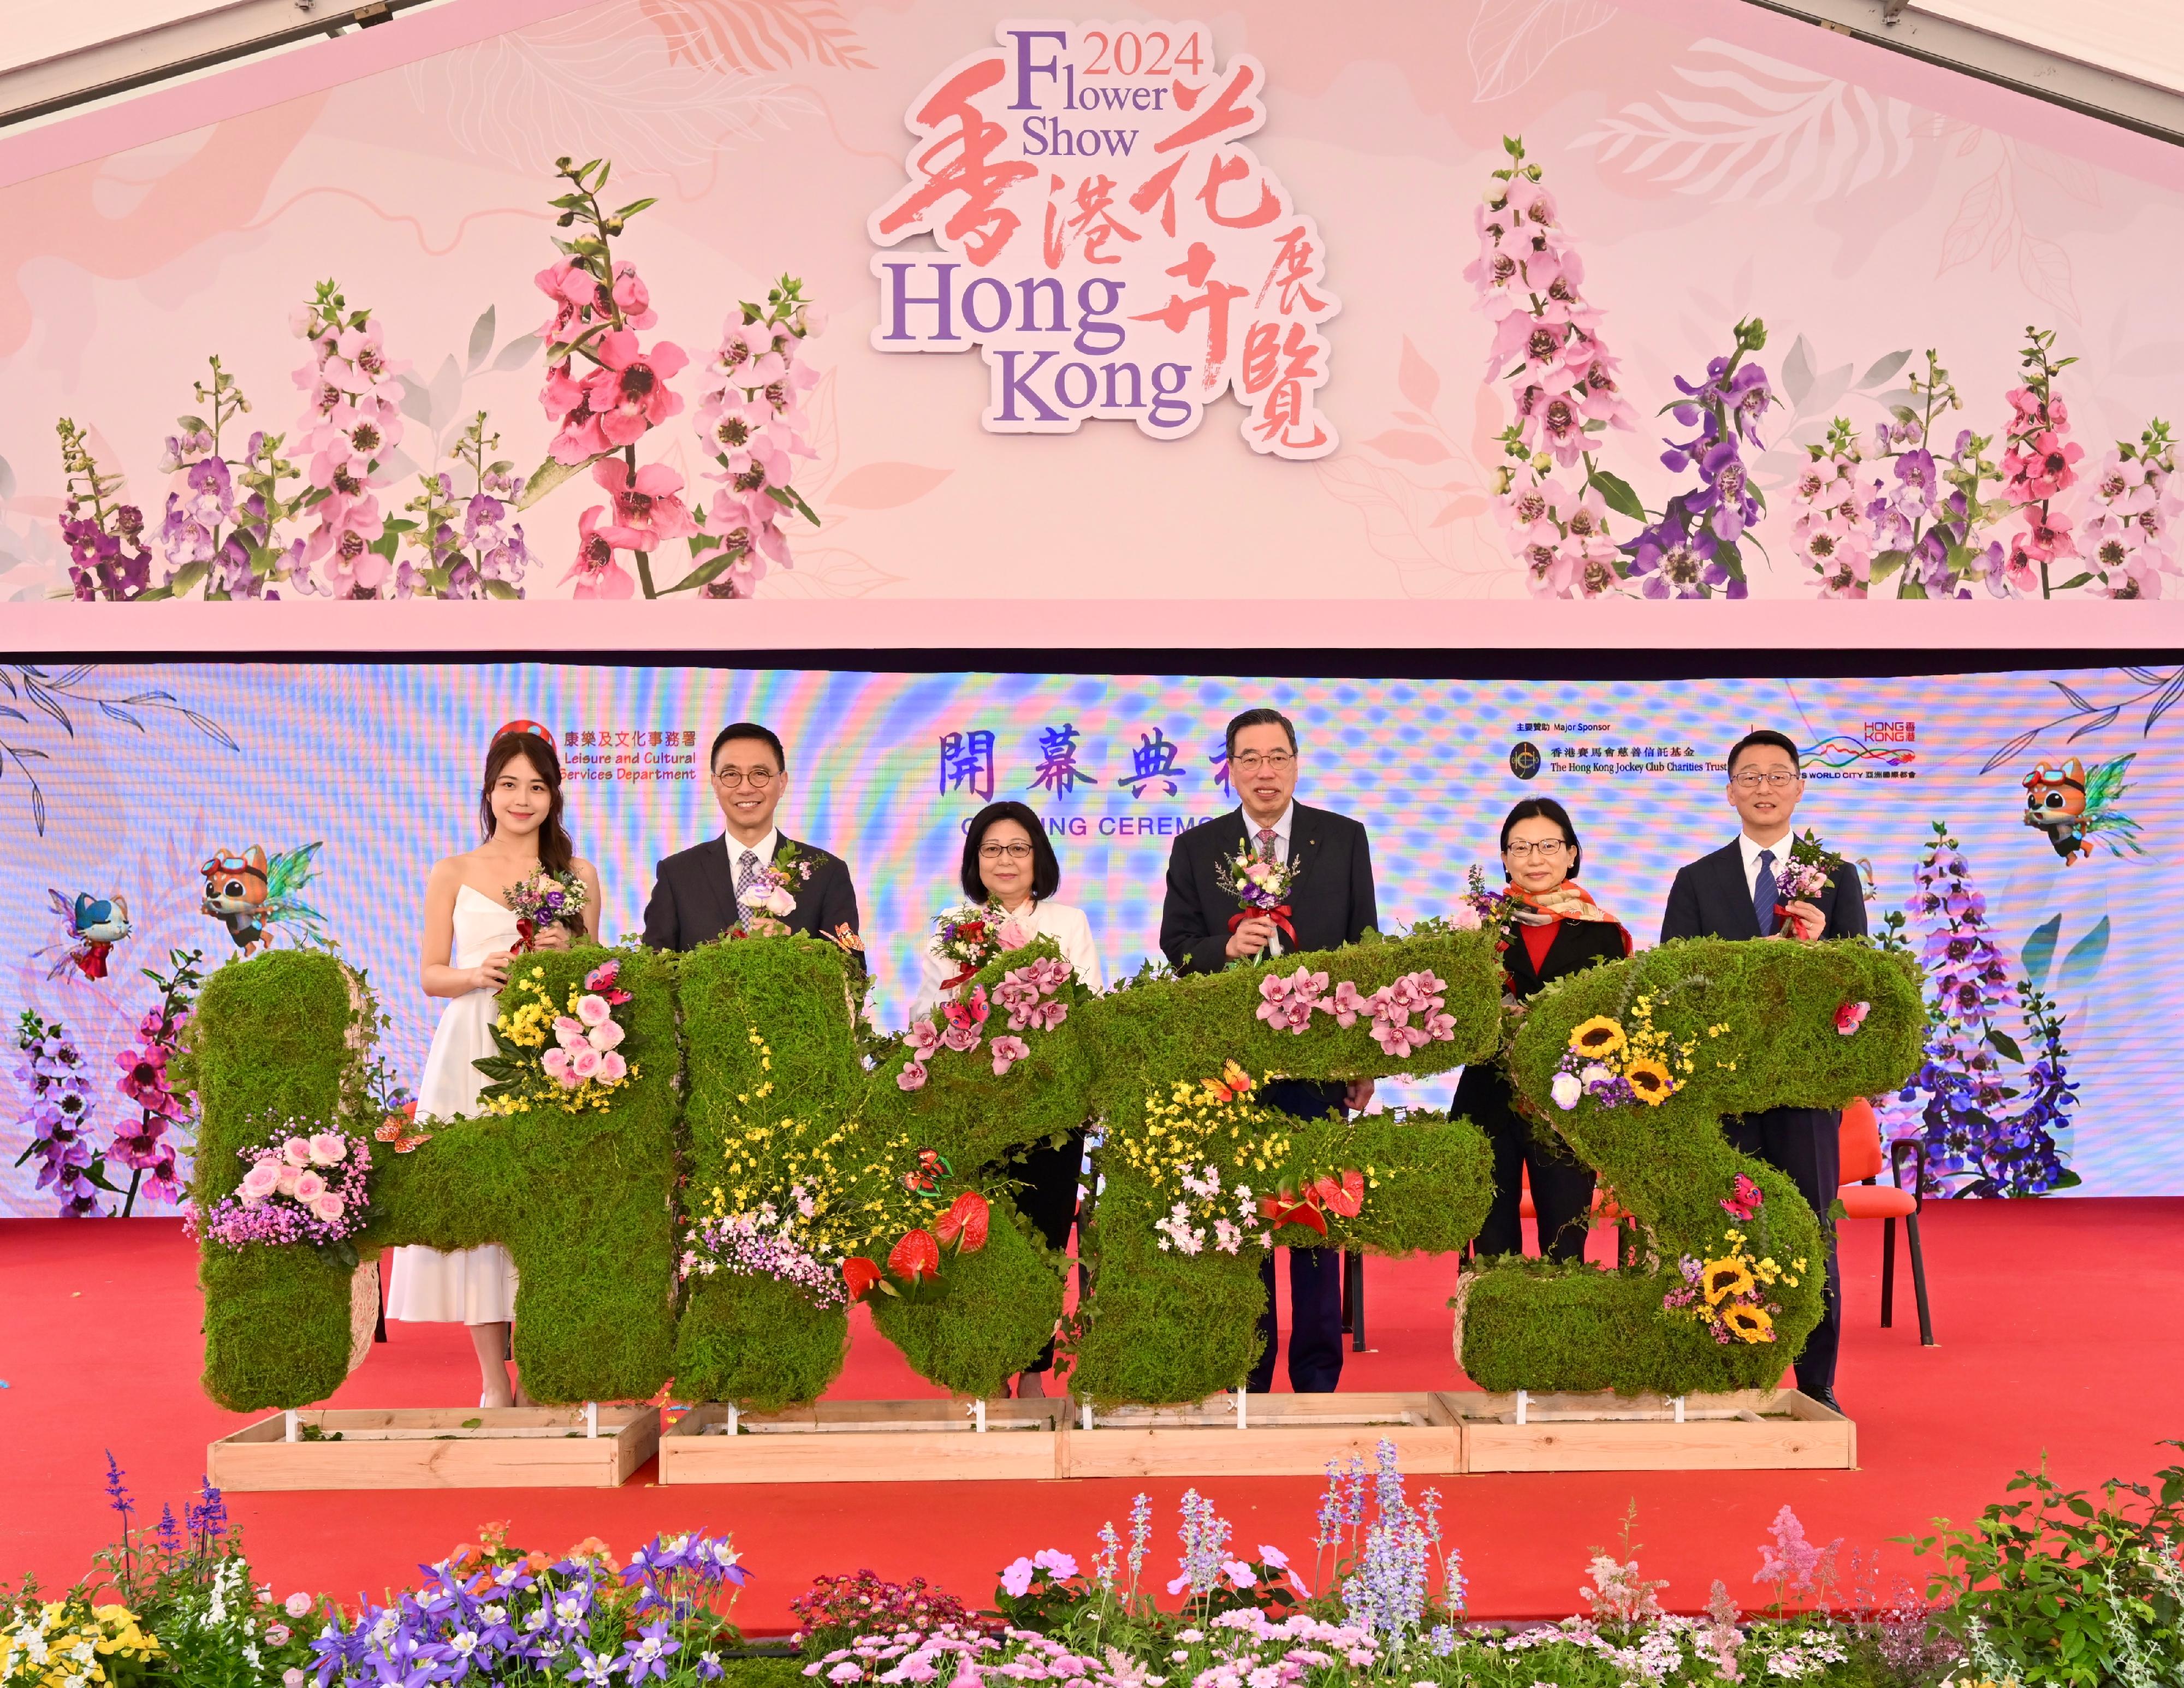 The annual Hong Kong Flower Show extravaganza opened at Victoria Park today (March 15) with some 420 000 flowers on display, including about 40 000 angelonias as the theme flower. Pictured are (from right) the Director of Leisure and Cultural Services, Mr Vincent Liu; Steward of the Hong Kong Jockey Club, Miss Anita Fung; the President of the Legislative Council, Mr Andrew Leung; the wife of the Chief Executive, Mrs Janet Lee; the Secretary for Culture, Sports and Tourism, Mr Kevin Yeung; and Miss Hong Kong 2023 Hilary Chong at the opening ceremony.